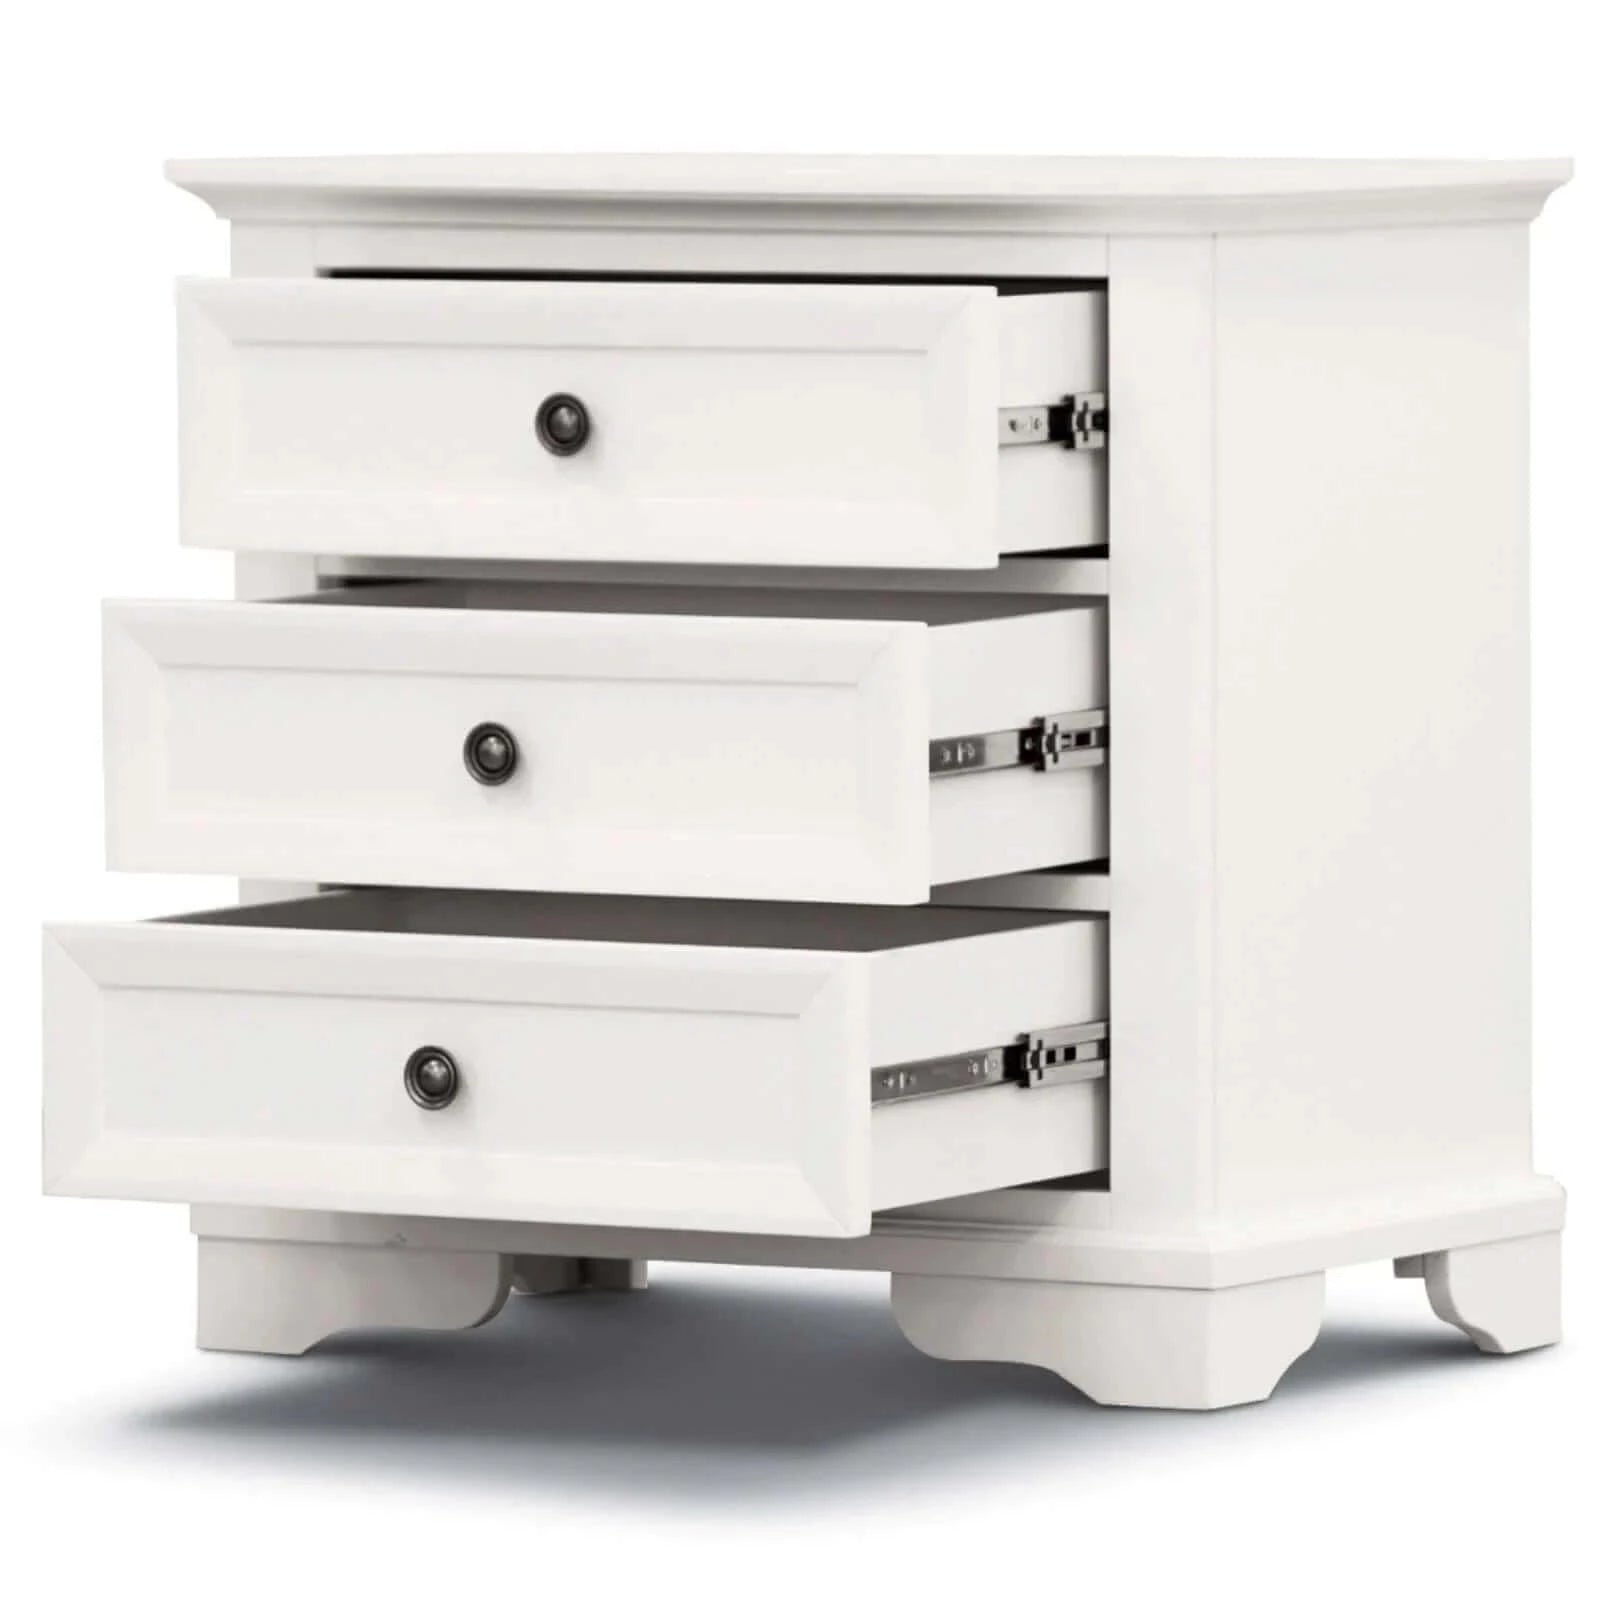 Buy celosia 2pc bedside tallboy 3pc bedroom set nightstand storage cabinet - white - upinteriors-Upinteriors